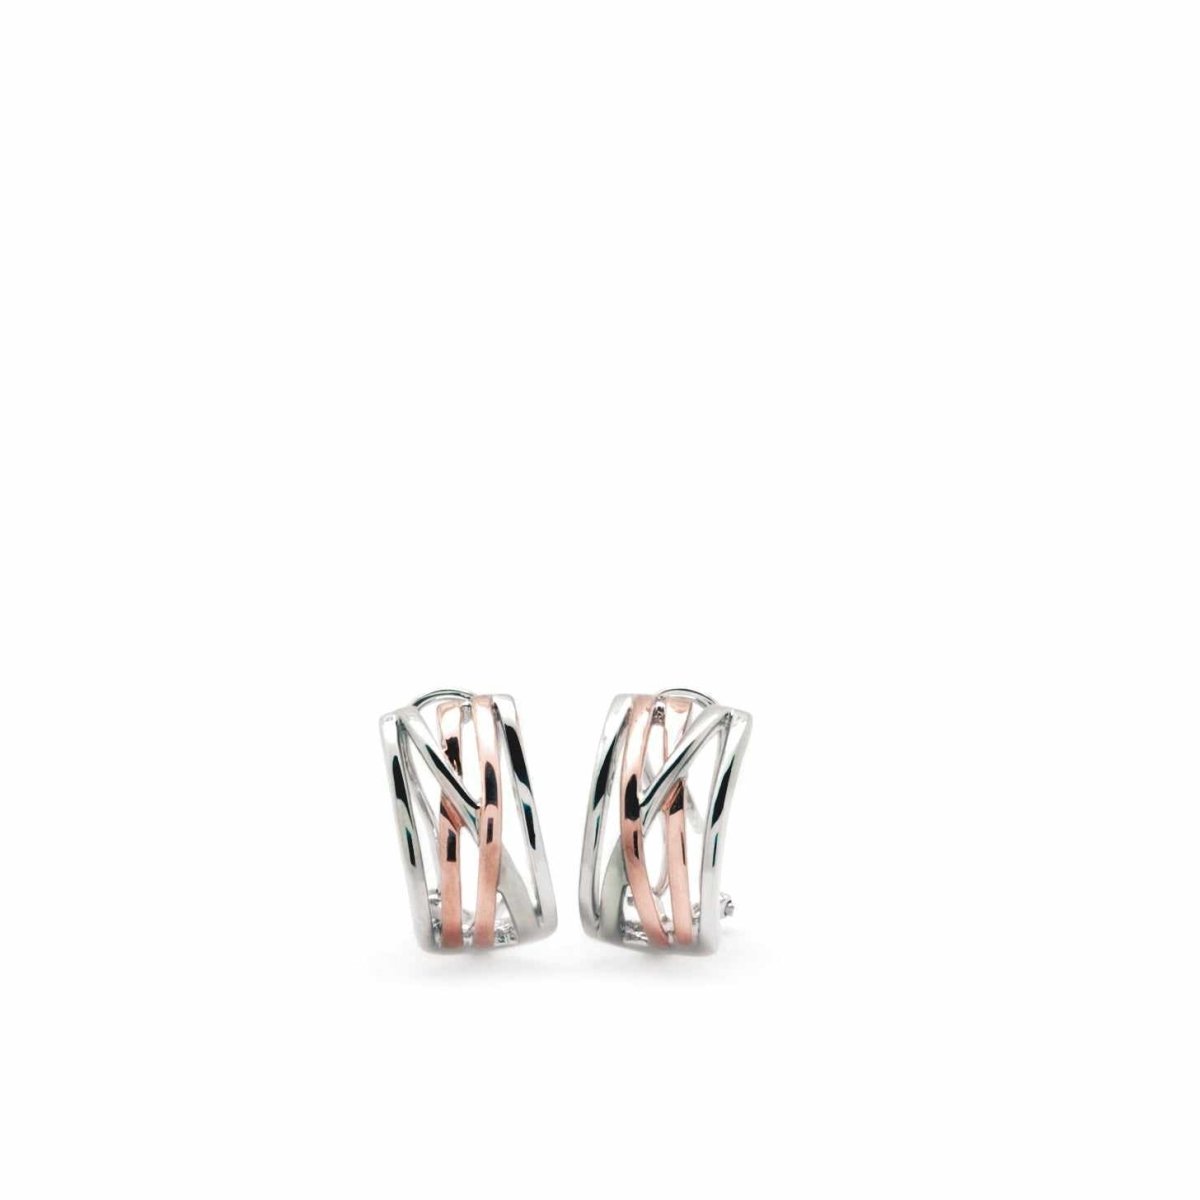 Earrings - Bicolor silver and vermeil silver intertwined design earrings